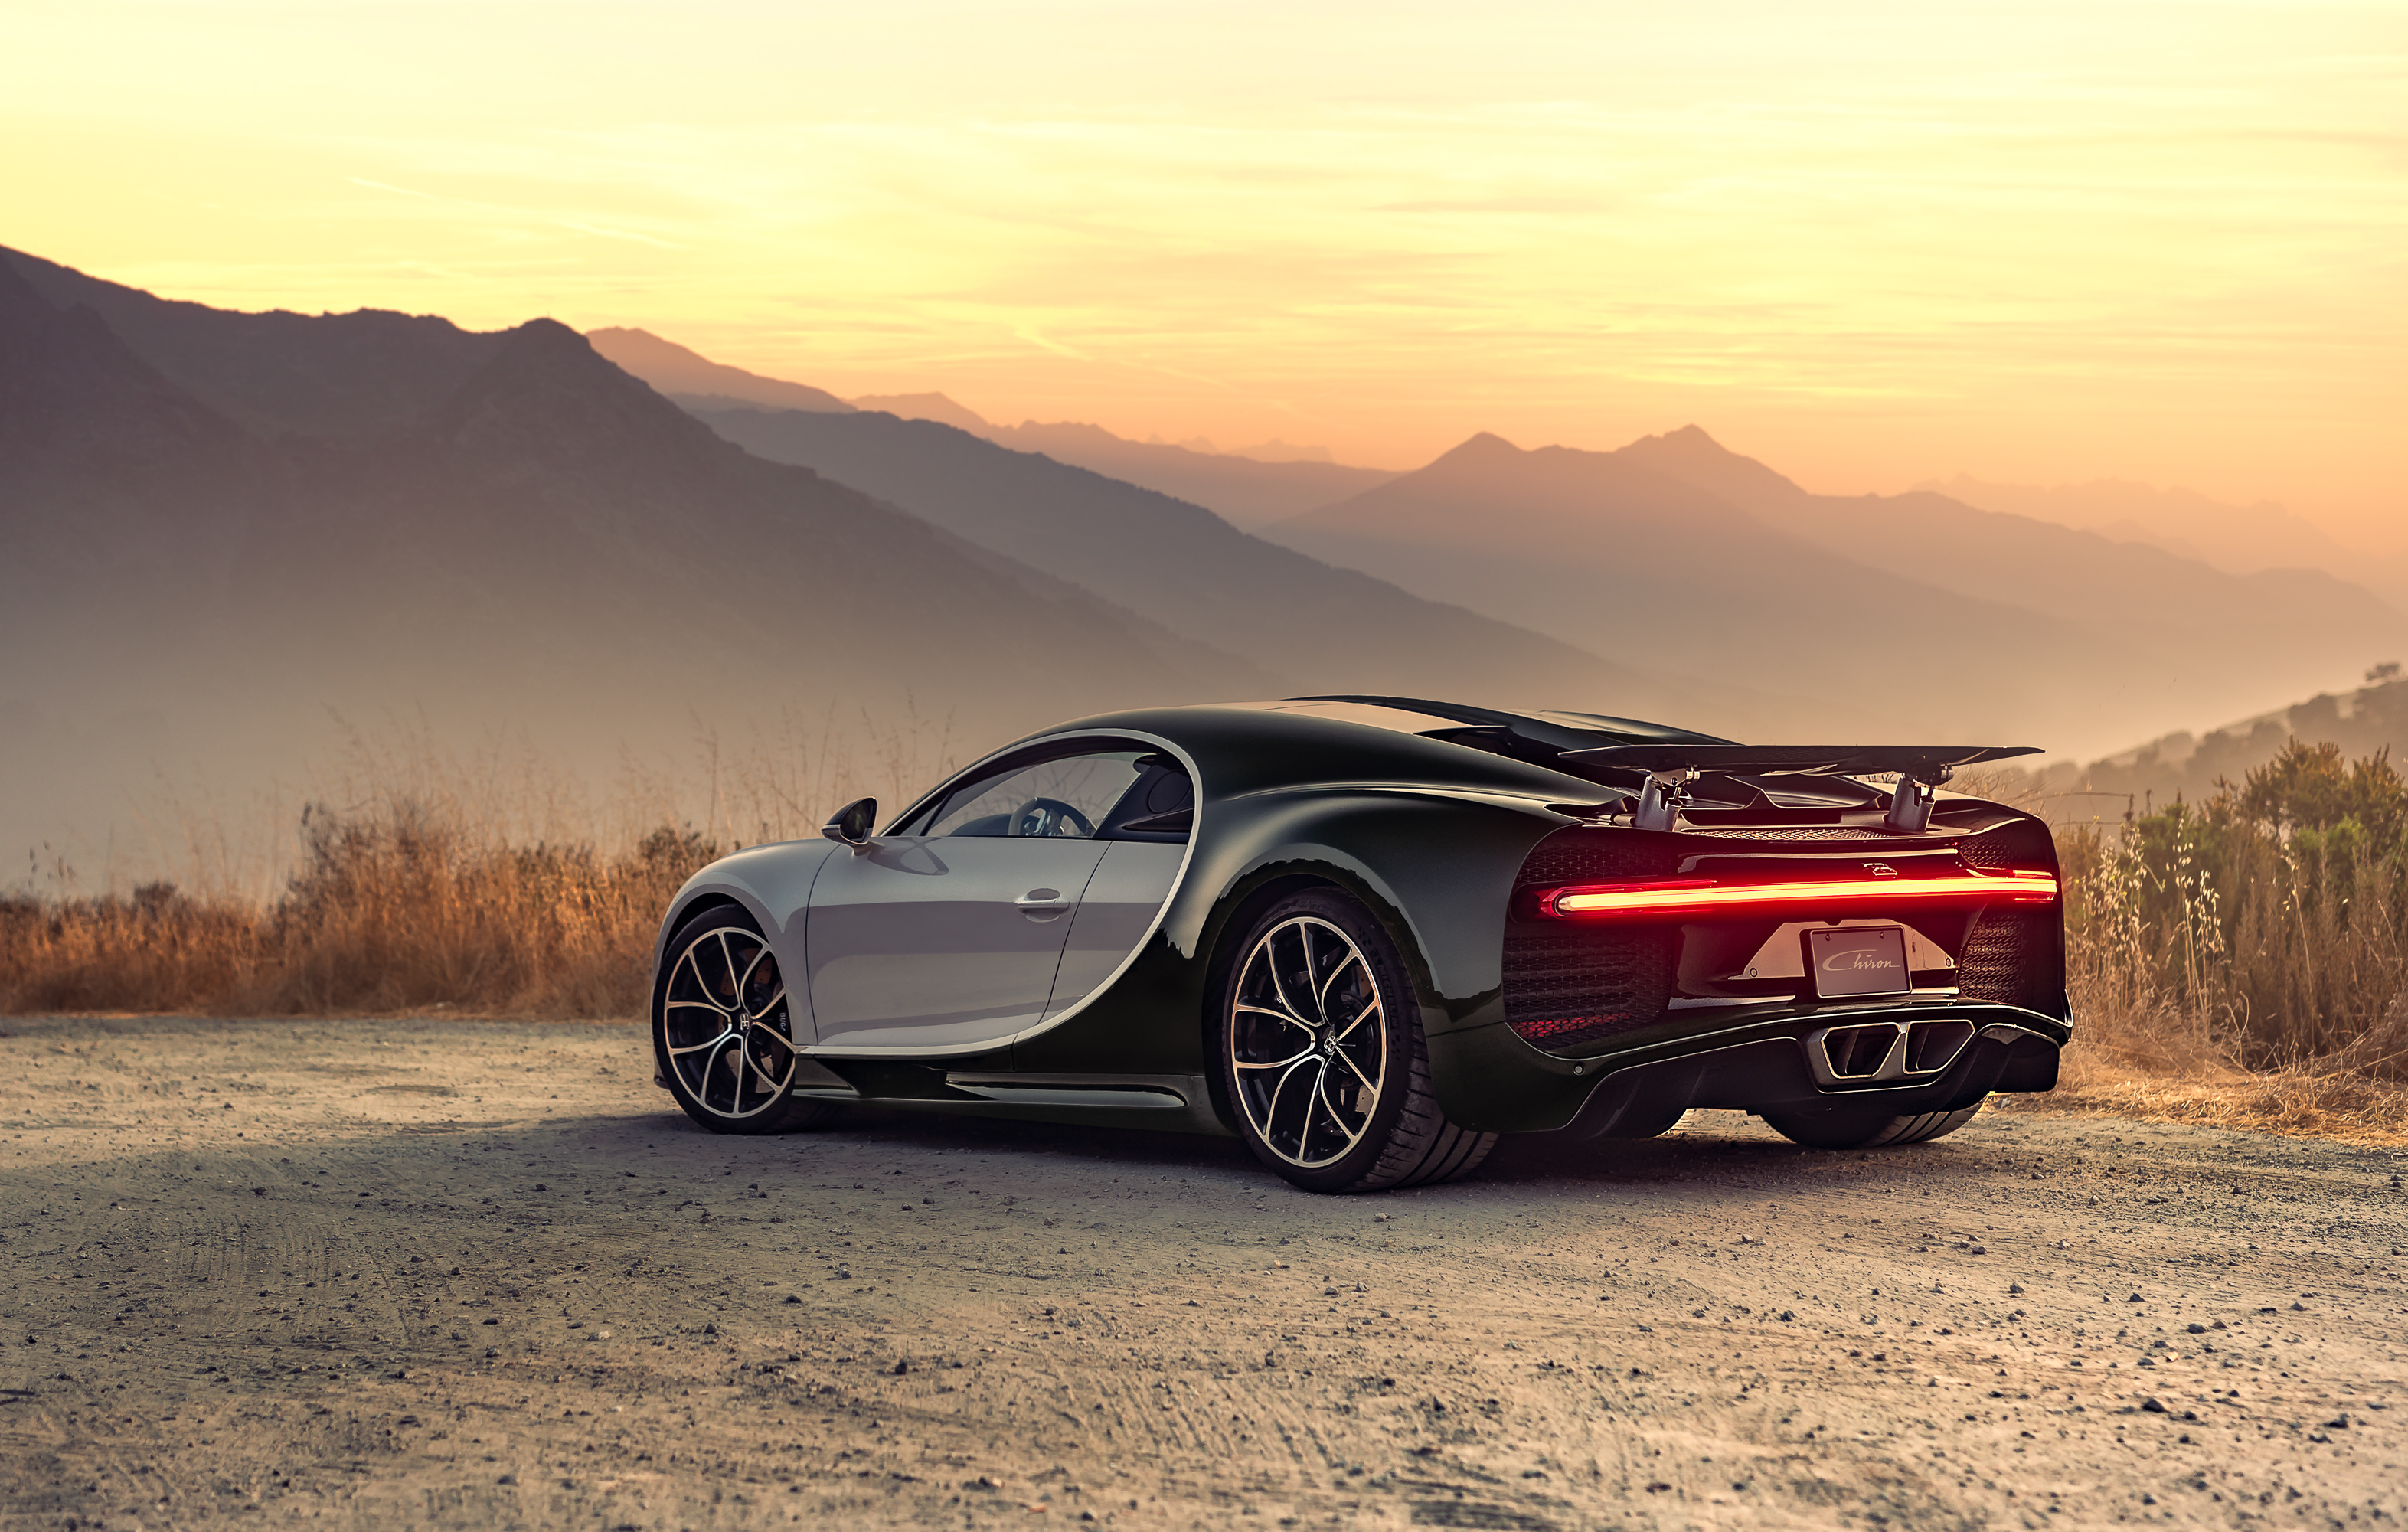 Bugatti Chiron Rear 4k, HD Cars, 4k Wallpapers, Images ...